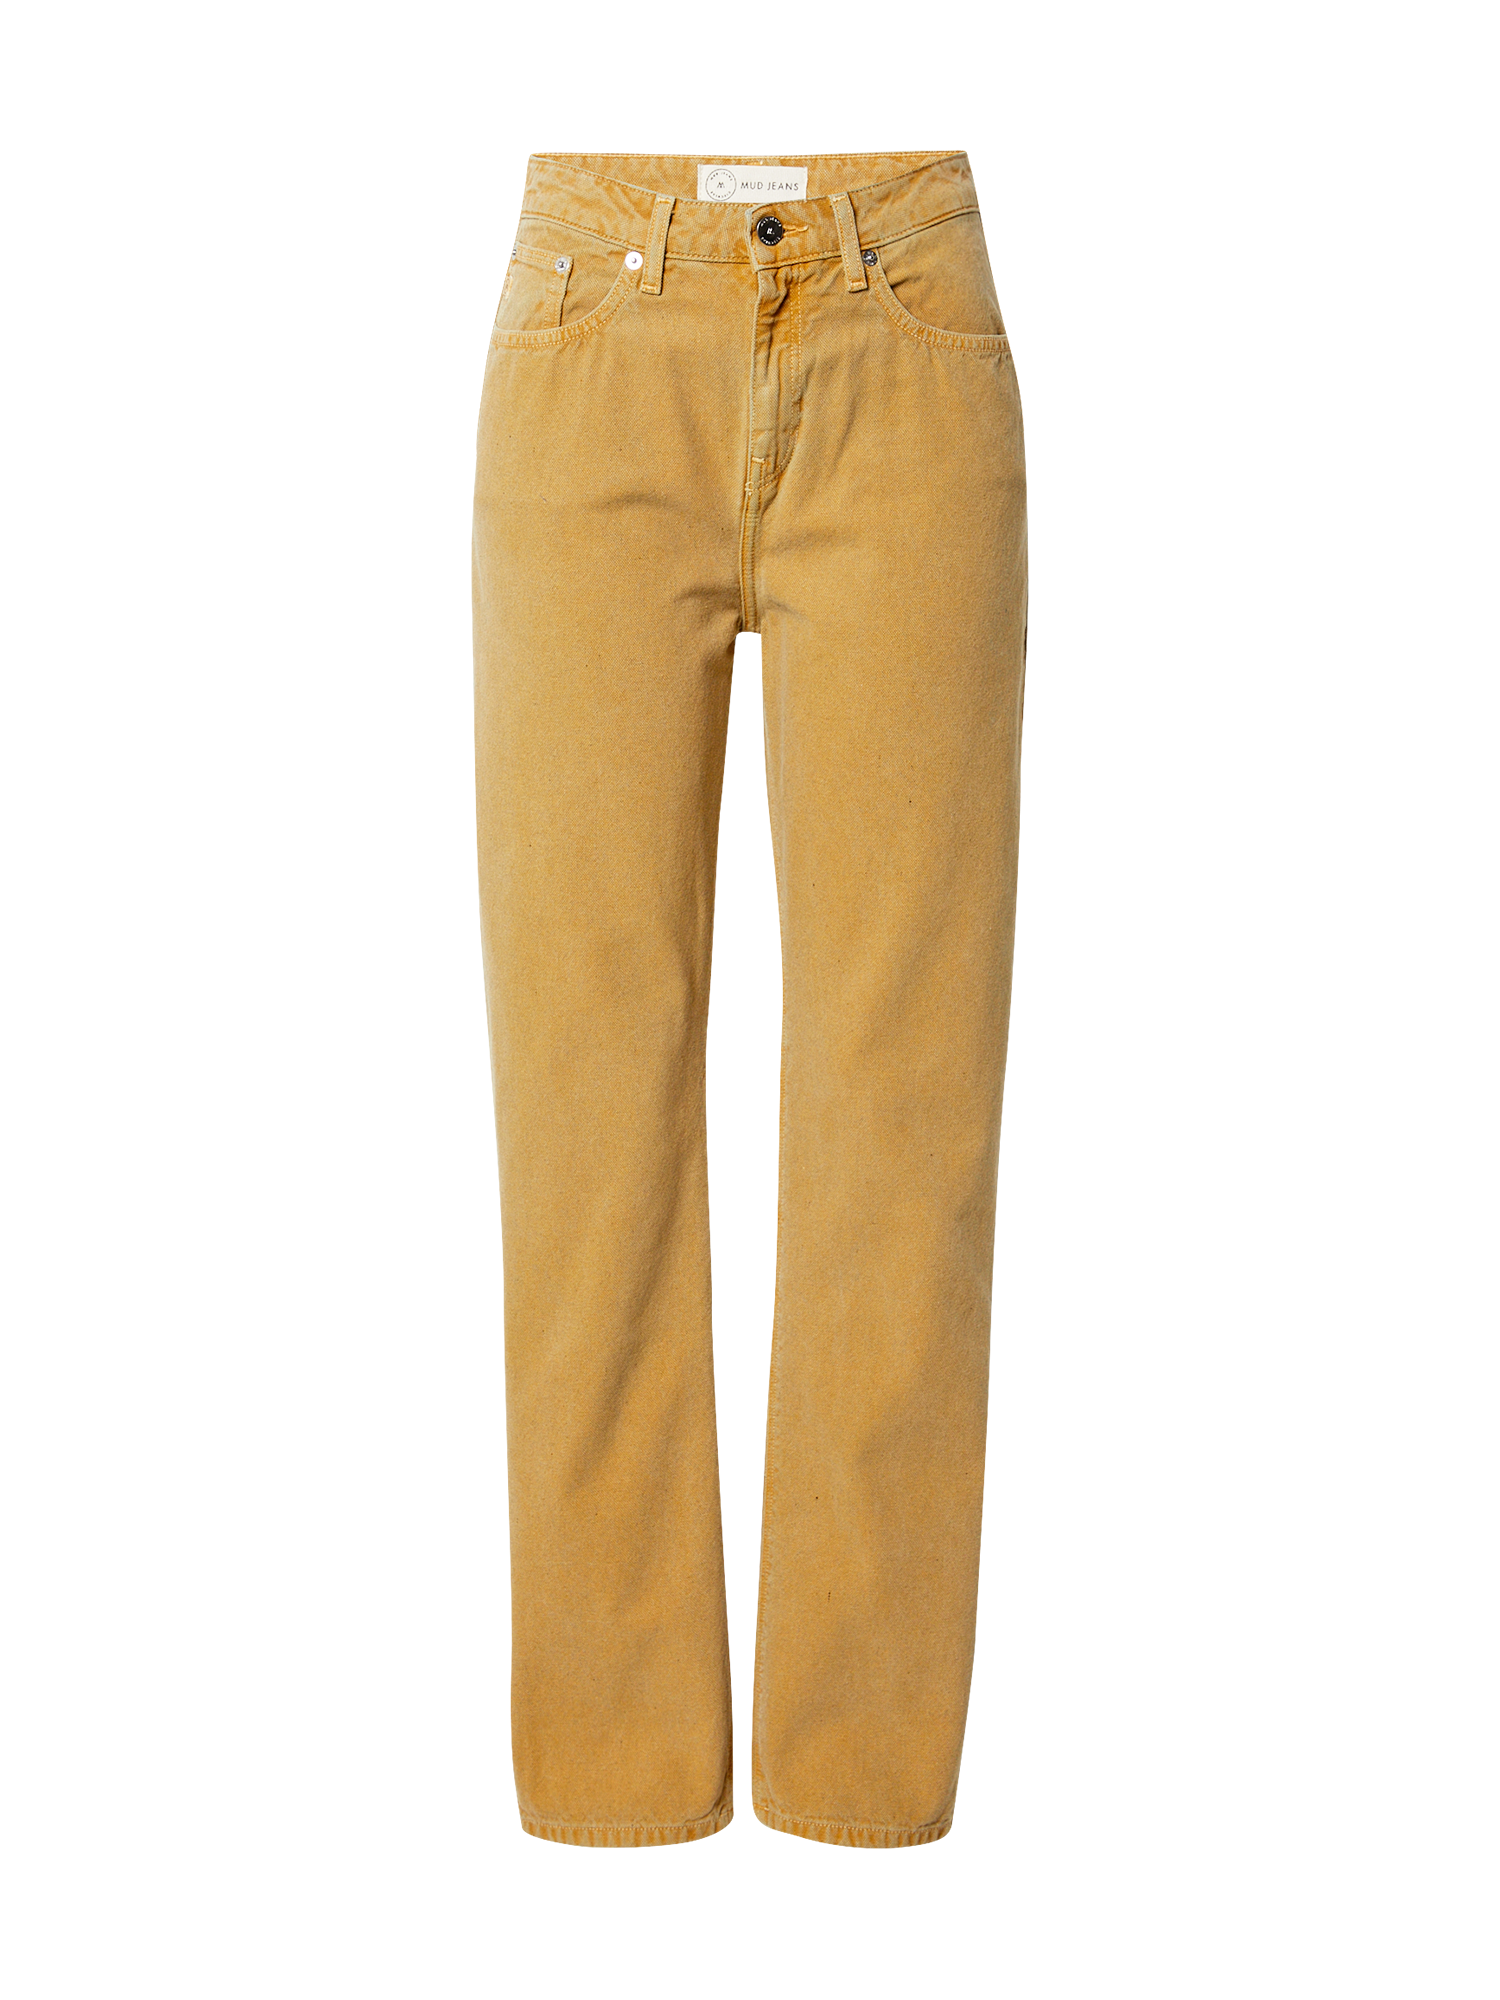 PROMO Donna MUD Jeans Jeans Rose in Beige 